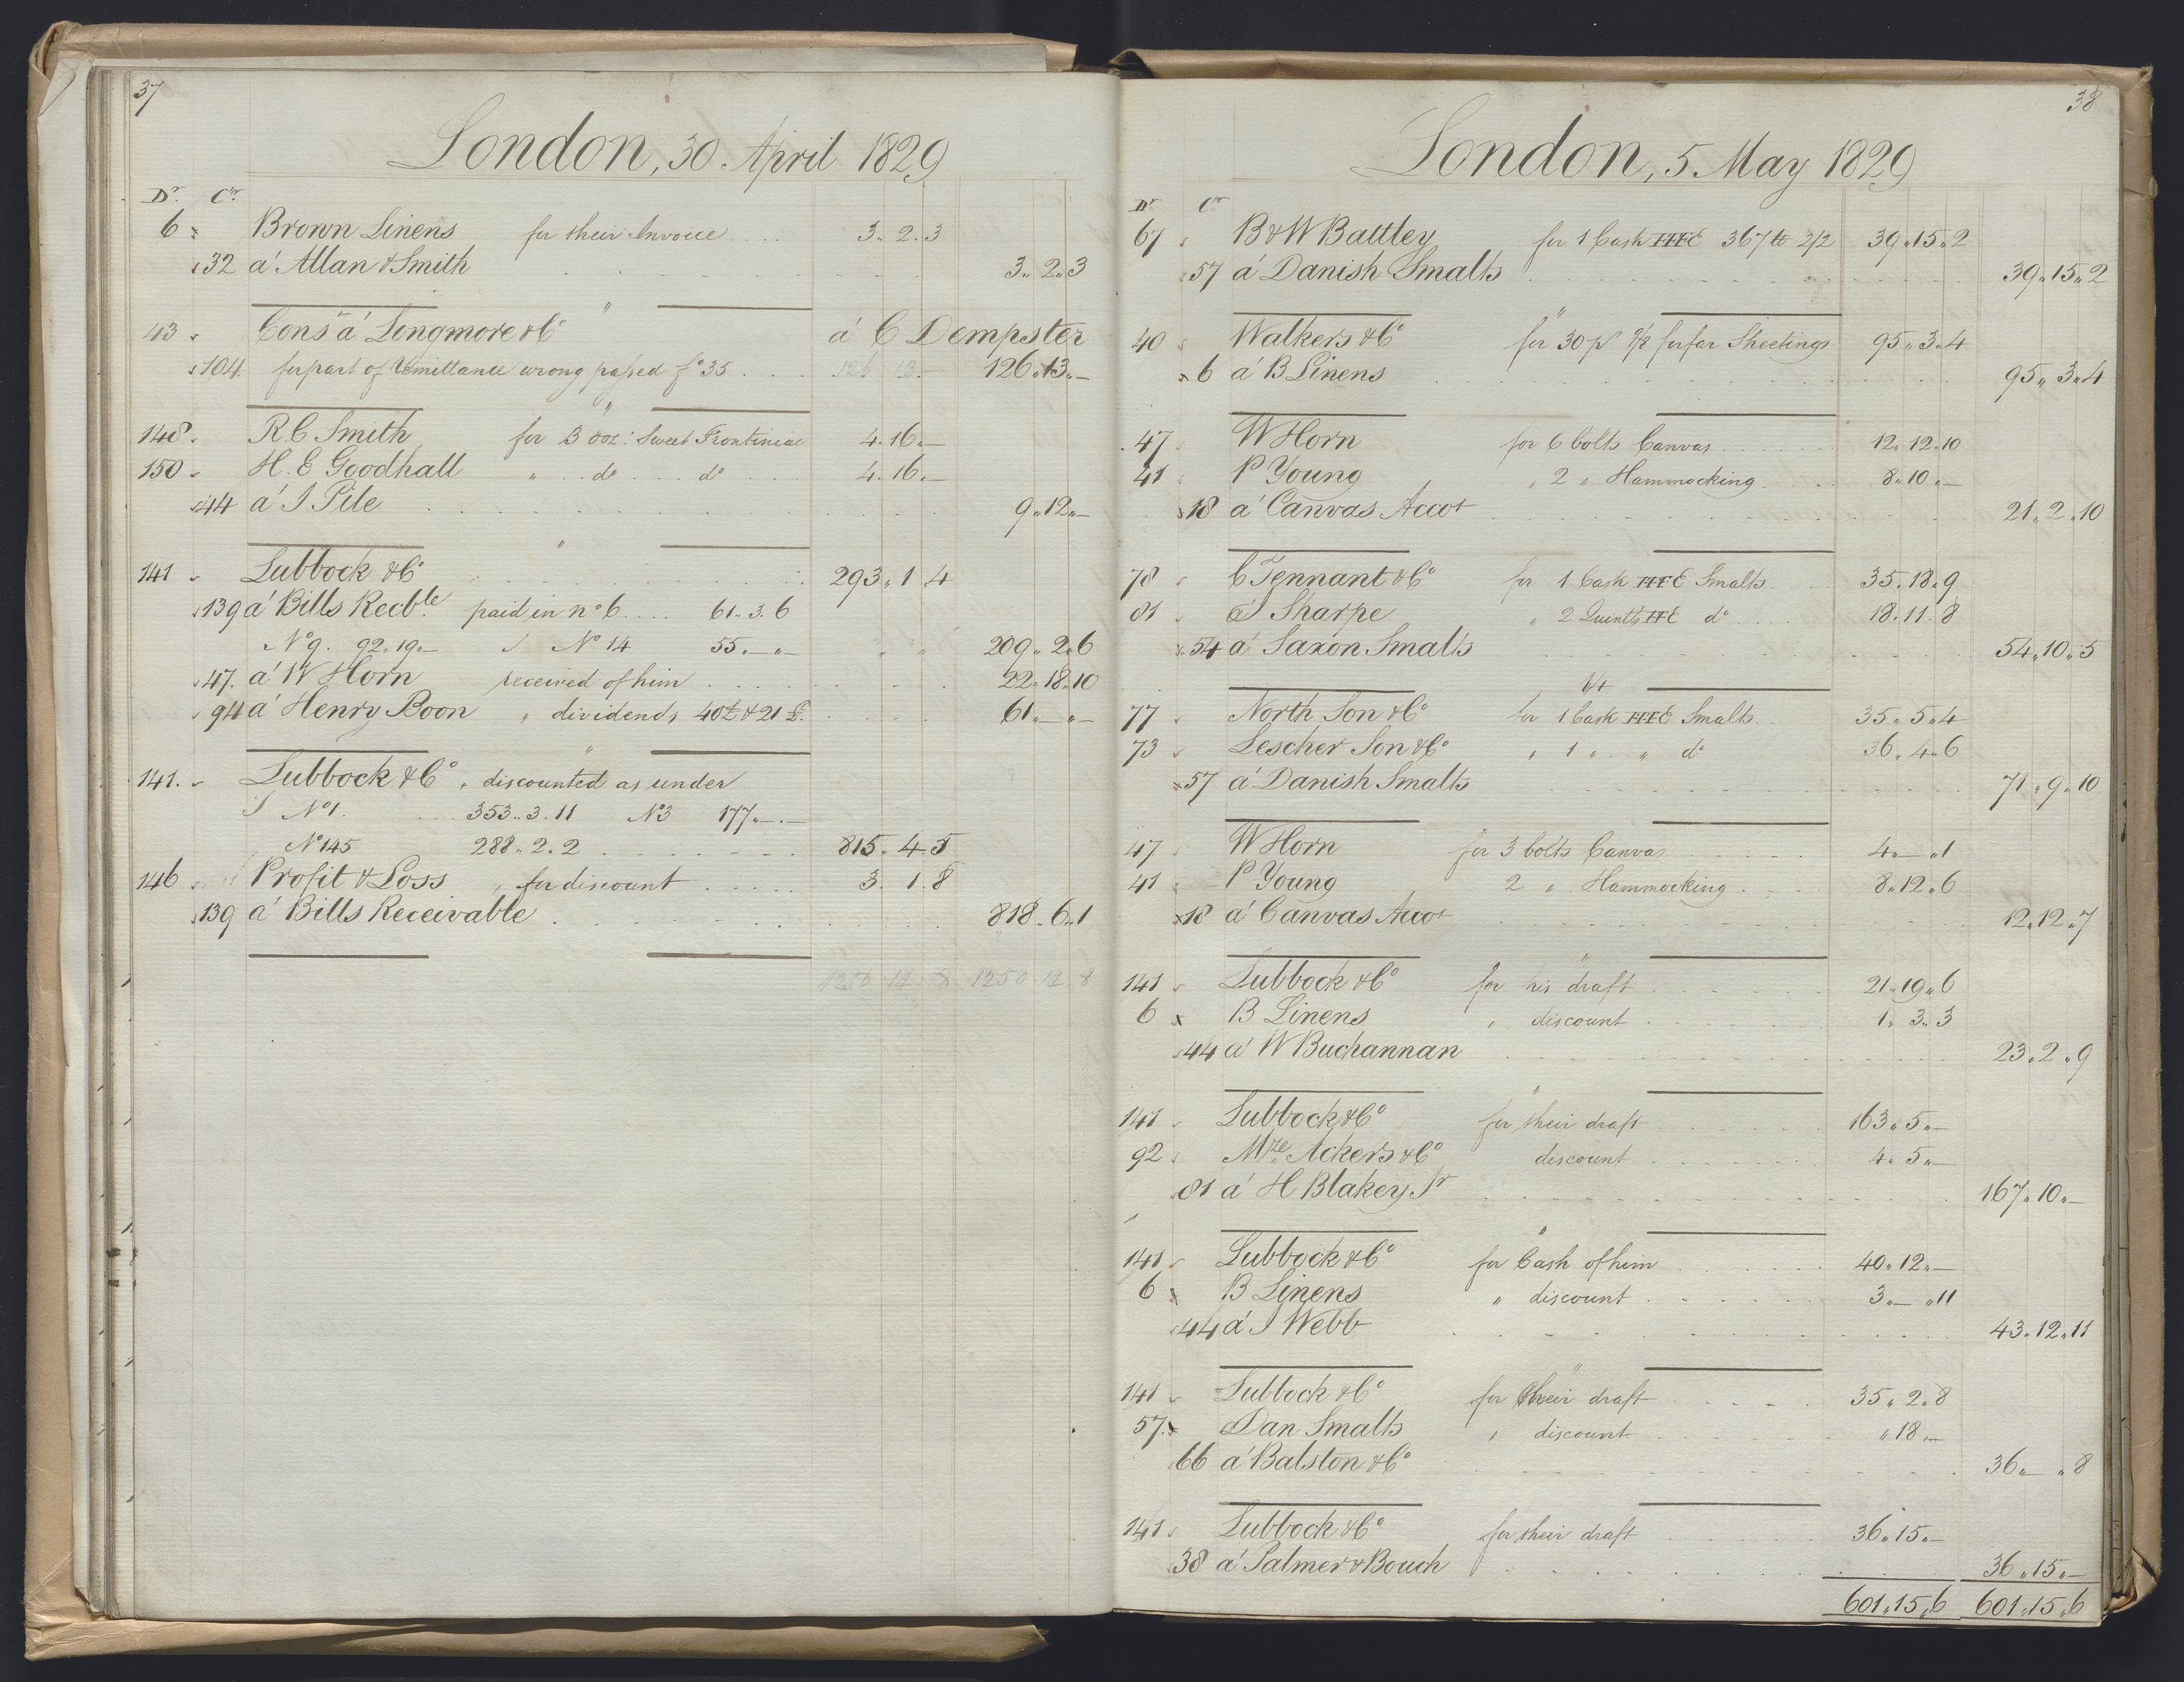 Smith, Goodhall & Reeves, RA/PA-0586/R/L0001: Dagbok (Daybook) A, 1829-1831, p. 37-38